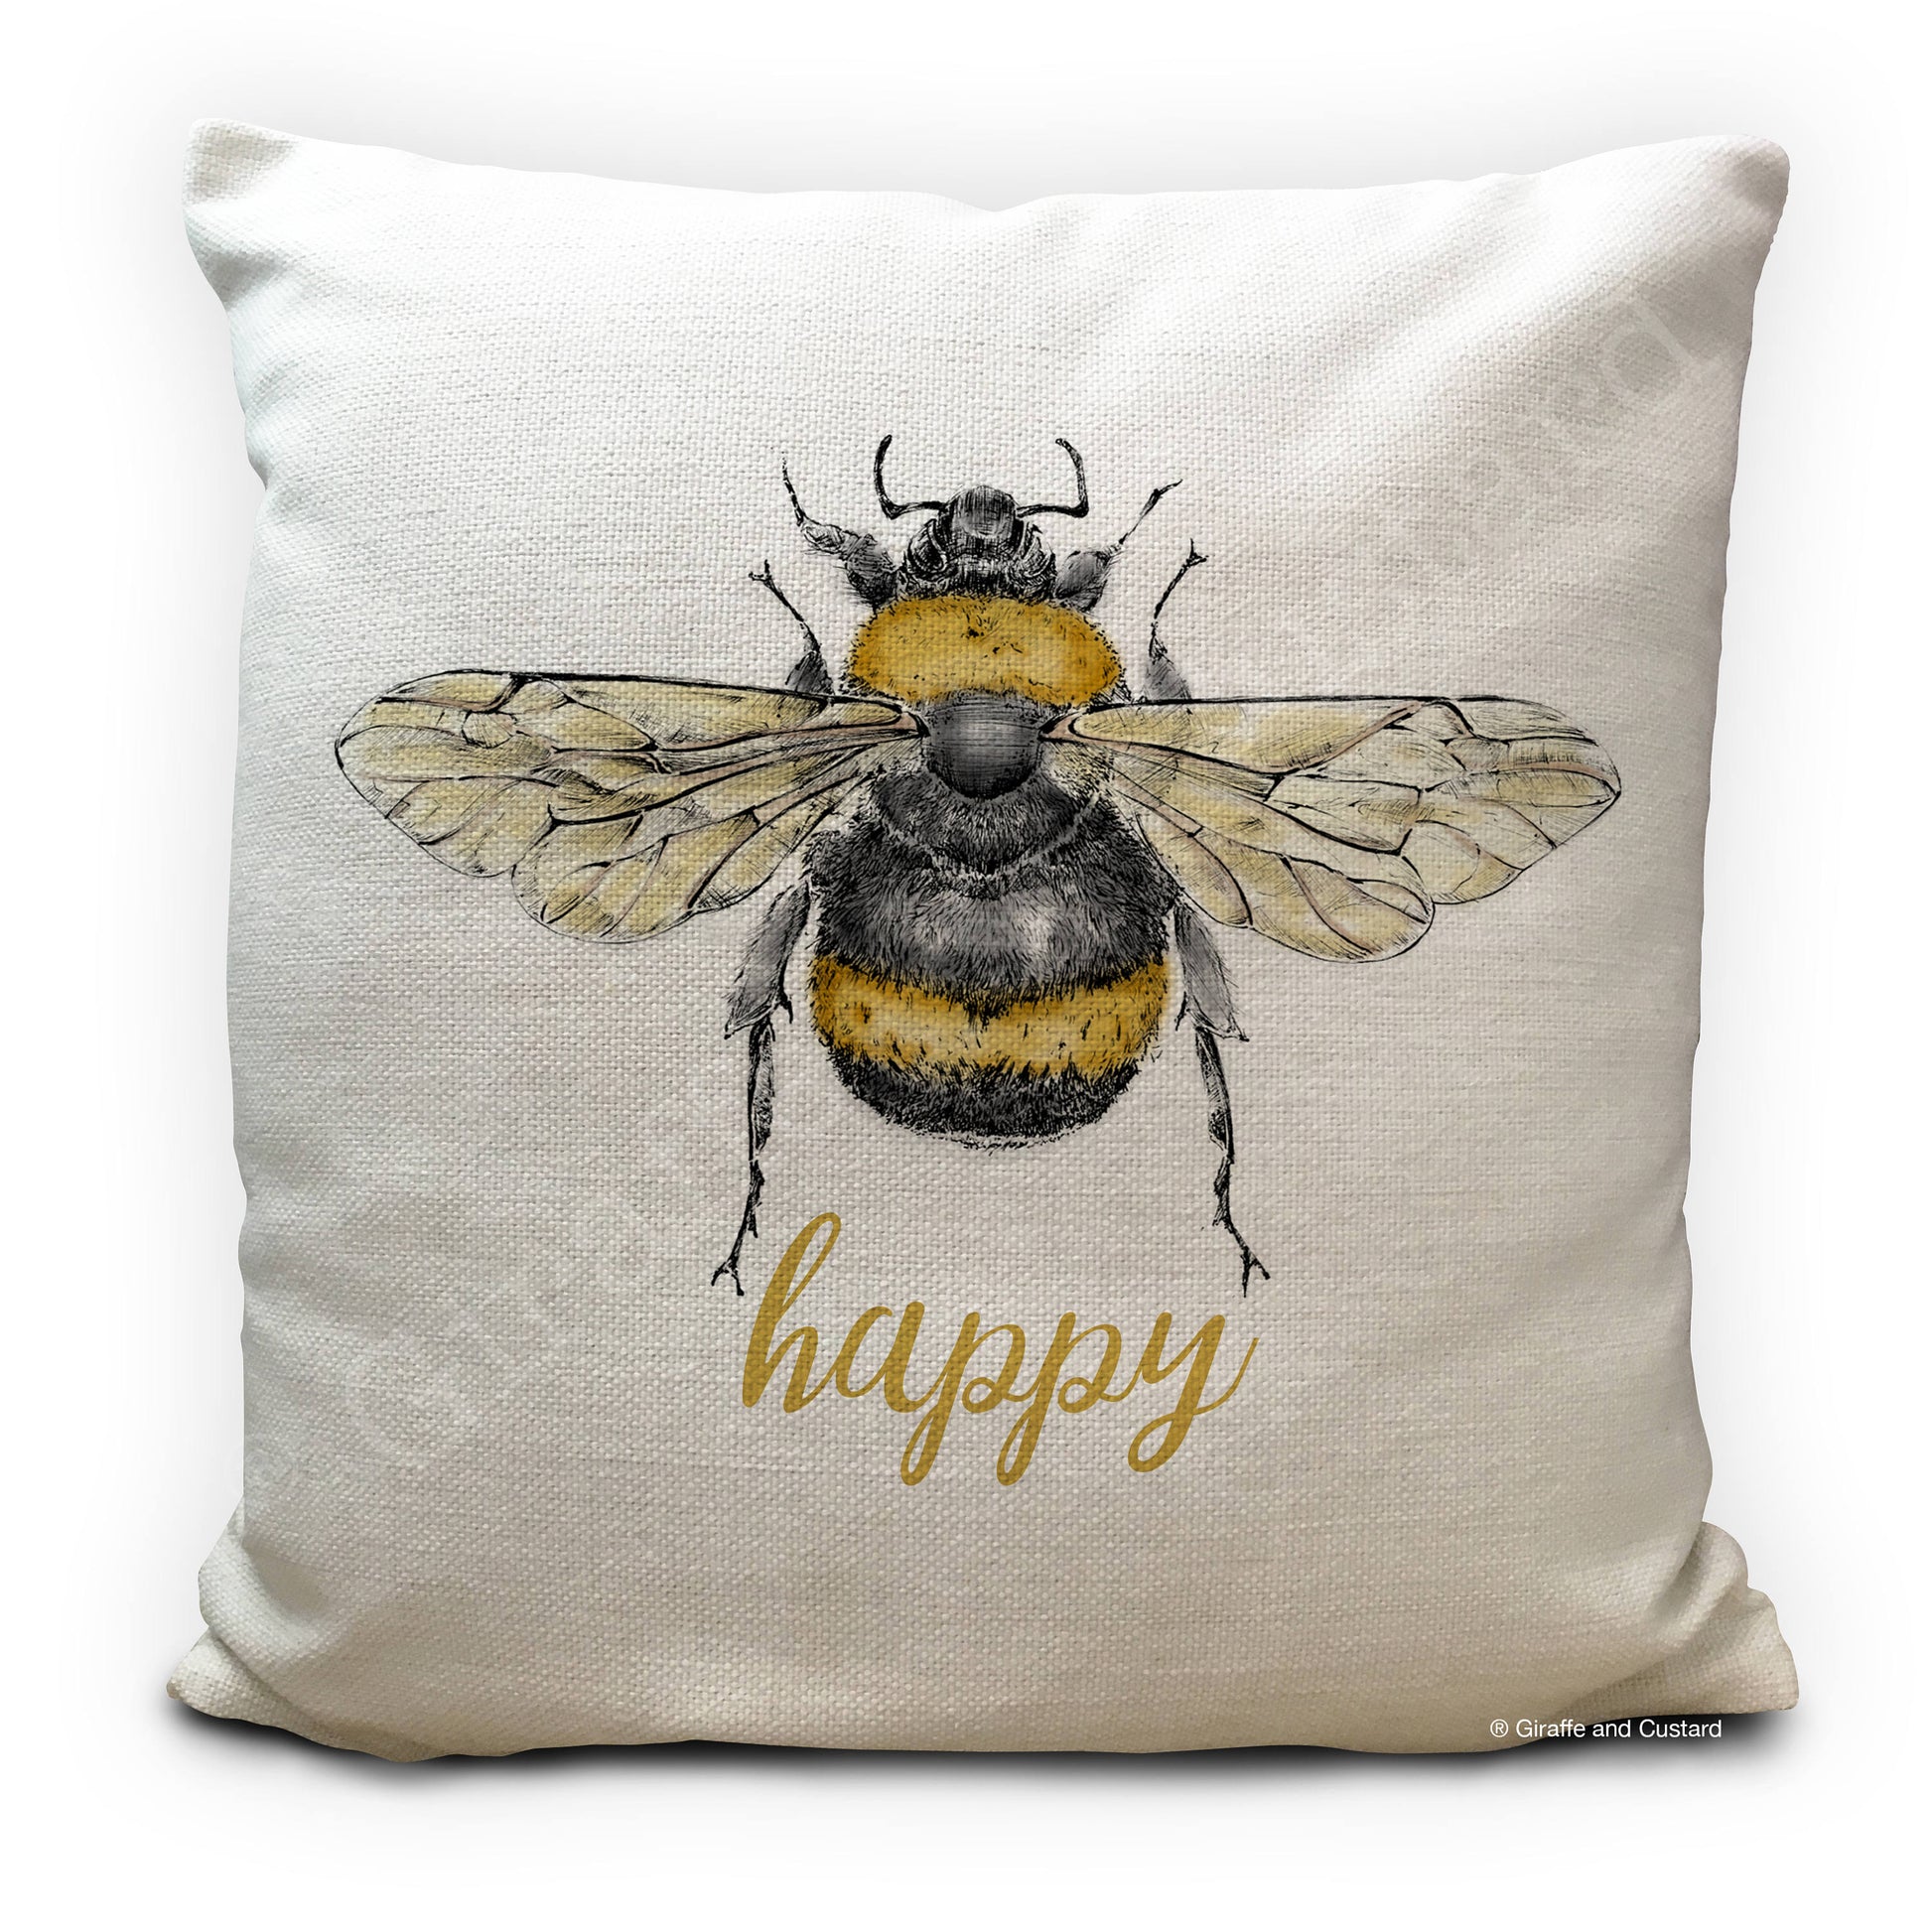 Bee Cushion Cover with be happy positivity quote